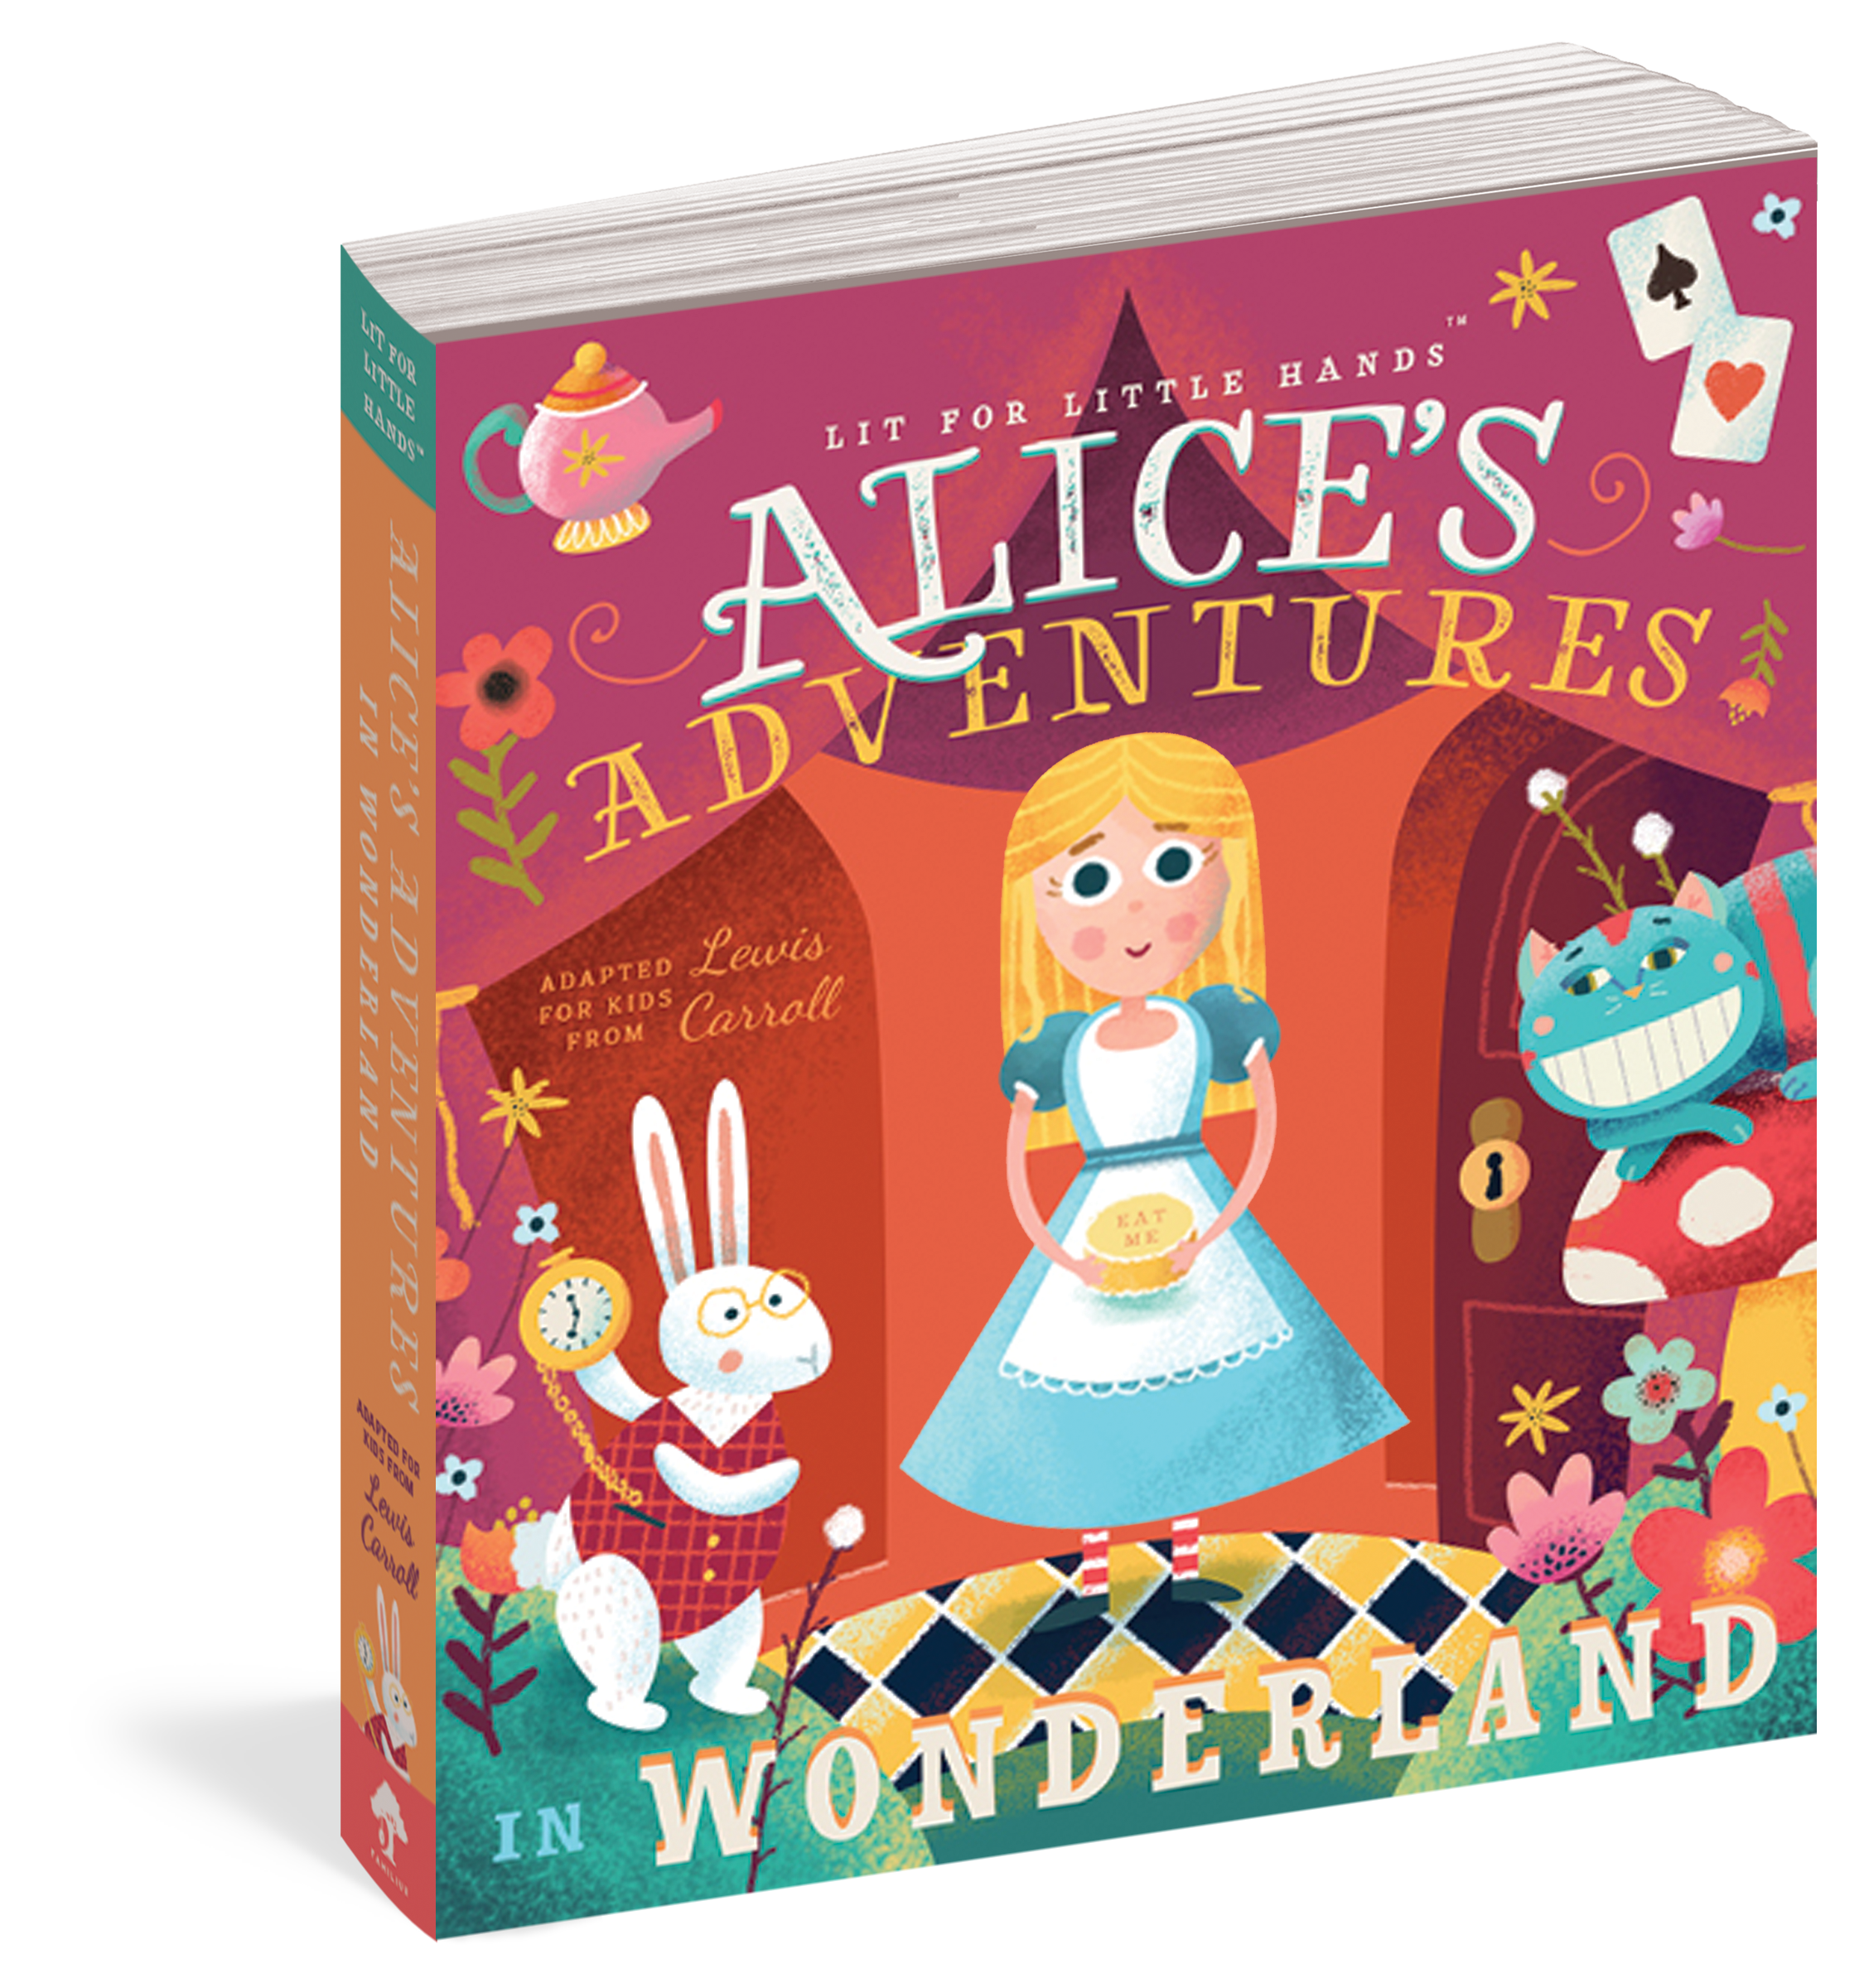 The cover of the board book Lit for Little Hands: Alice's Adventures in Wonderland.